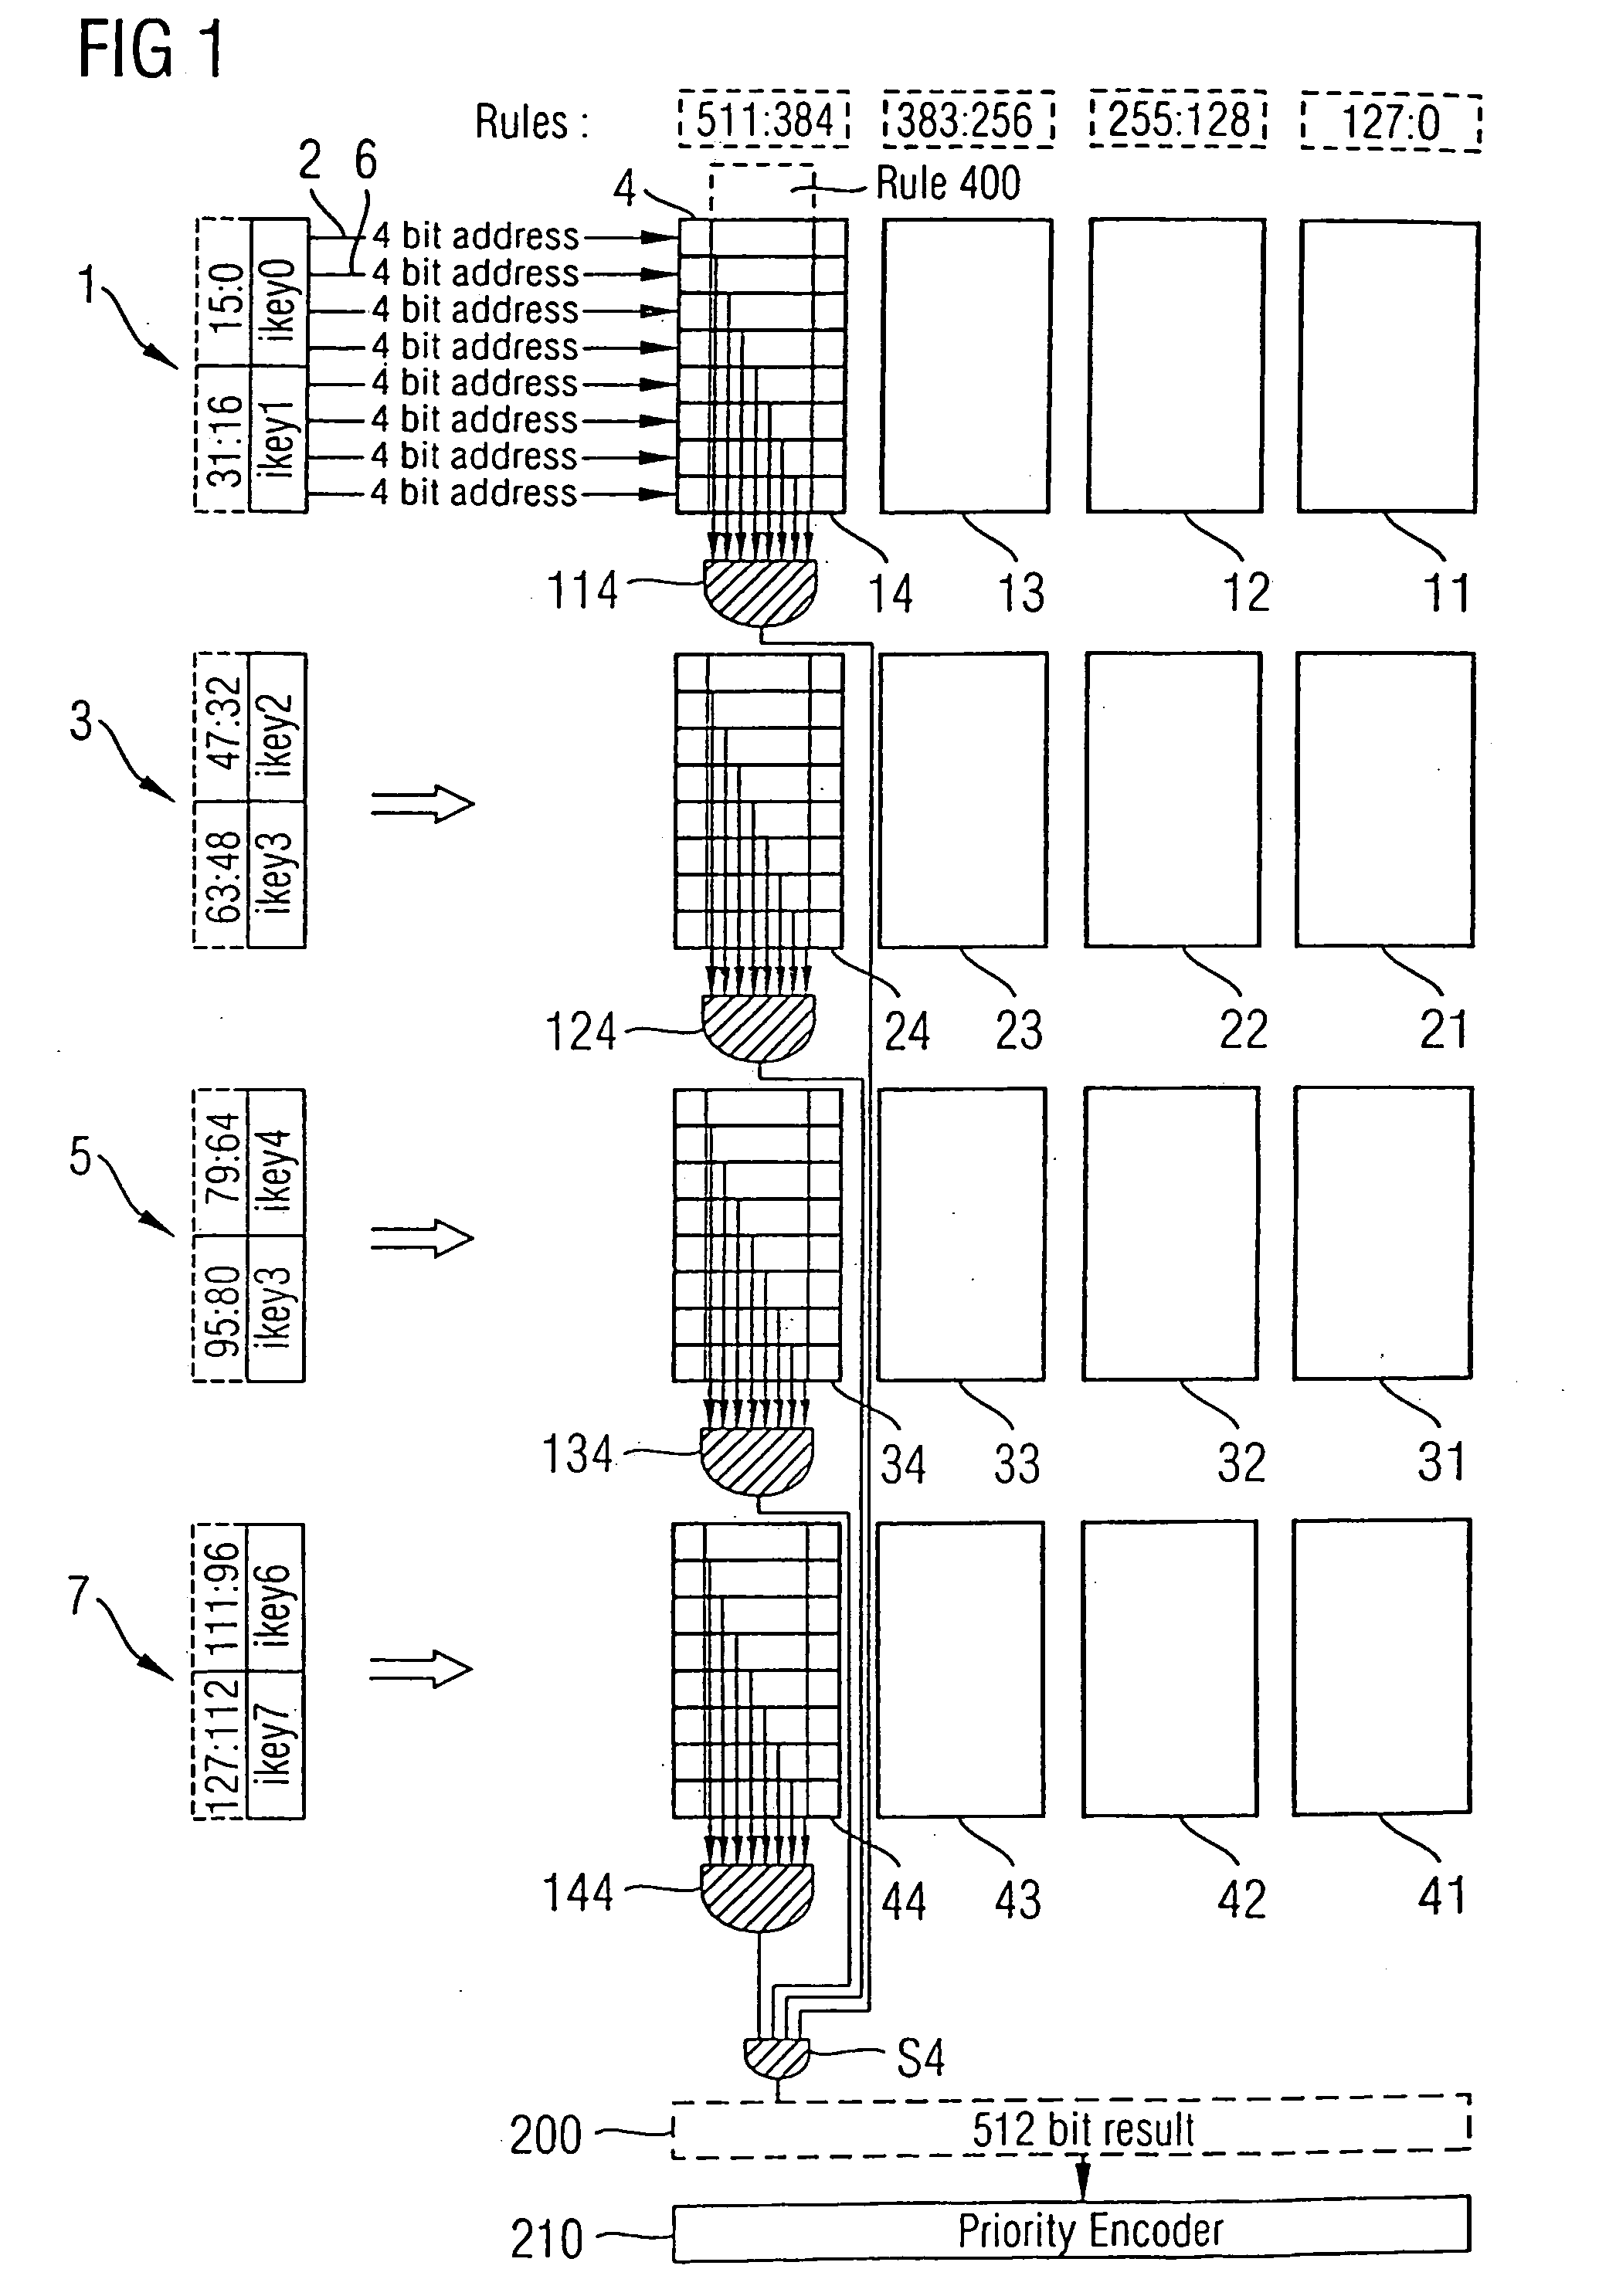 Method and system for determining conformance of a data key with rules by means of memory lookups